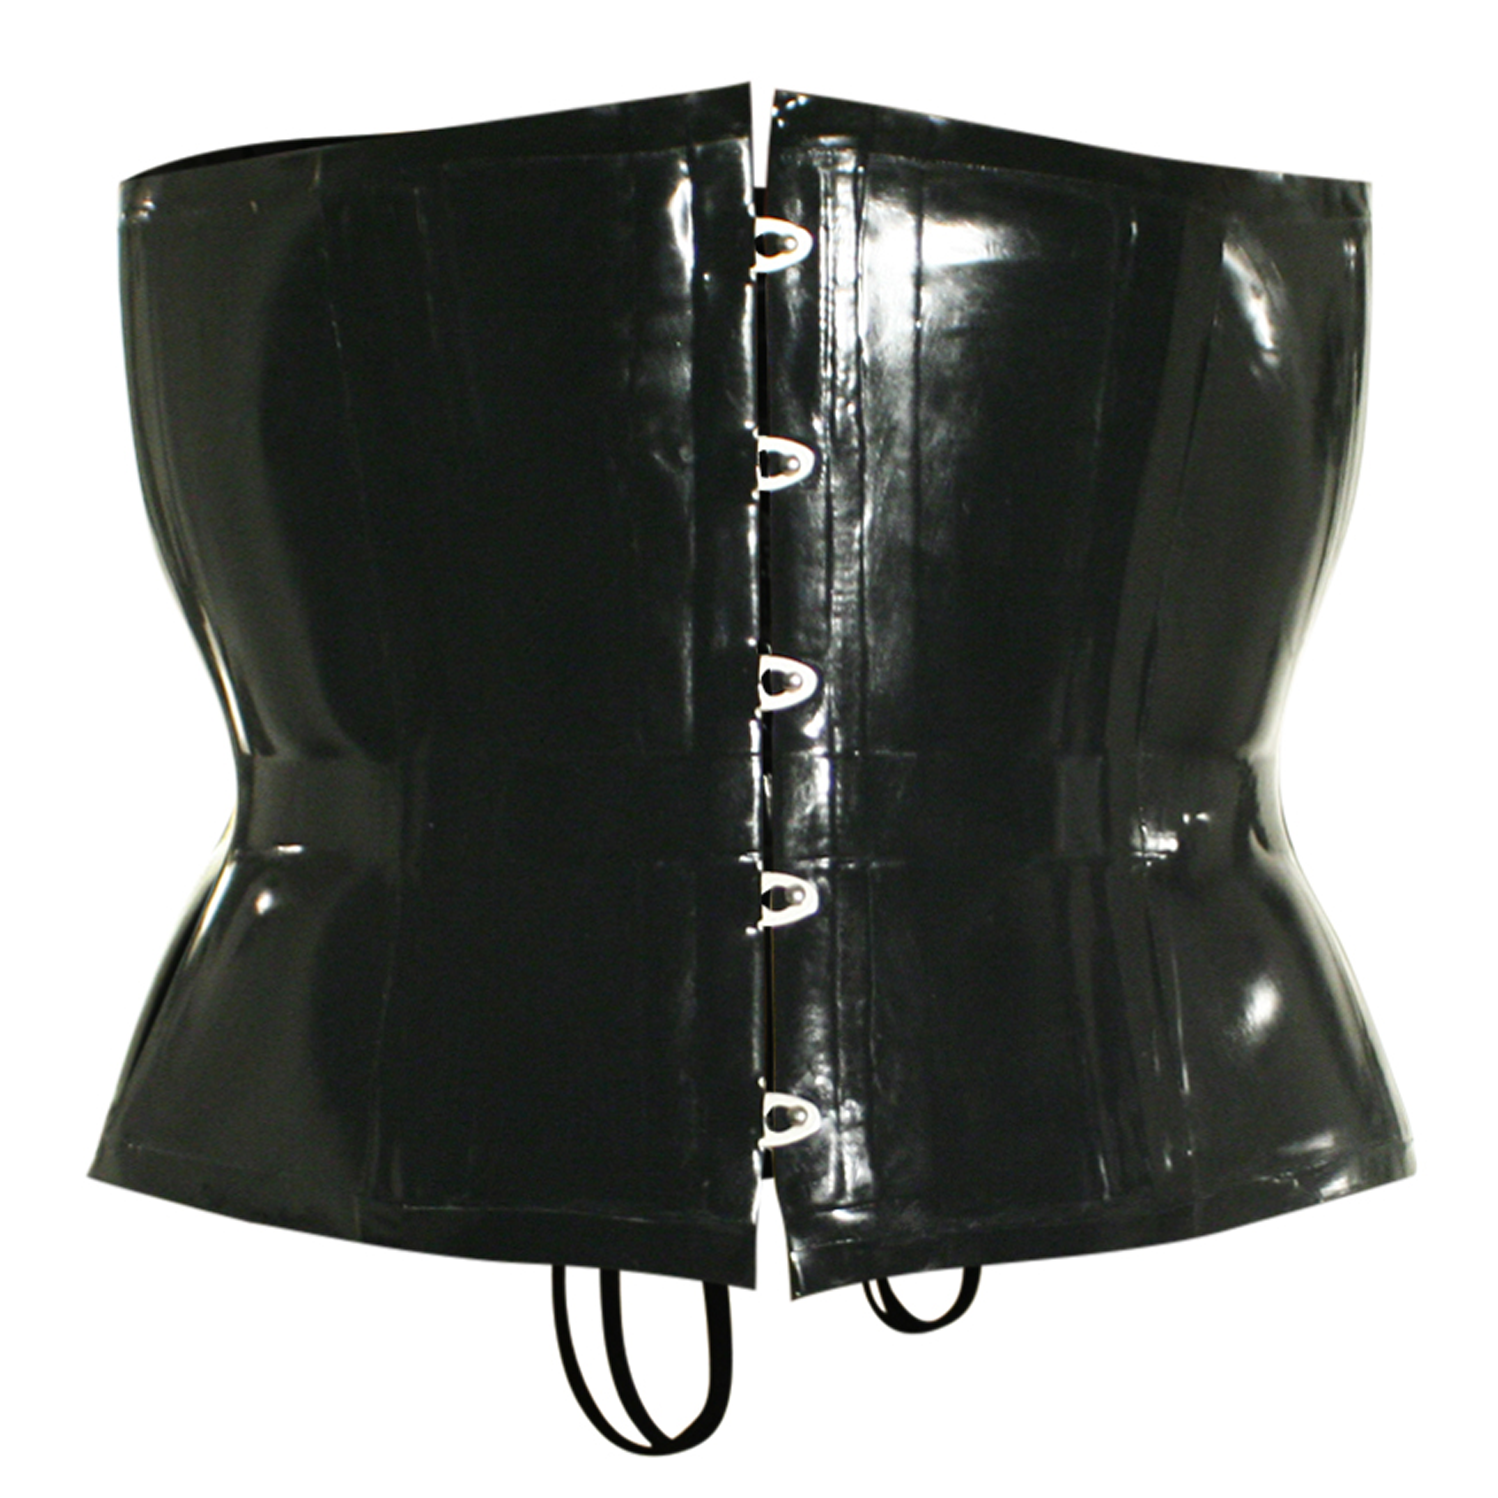 Latex Corset a Classic Under Bust Waist Cincher by Vex Clothing